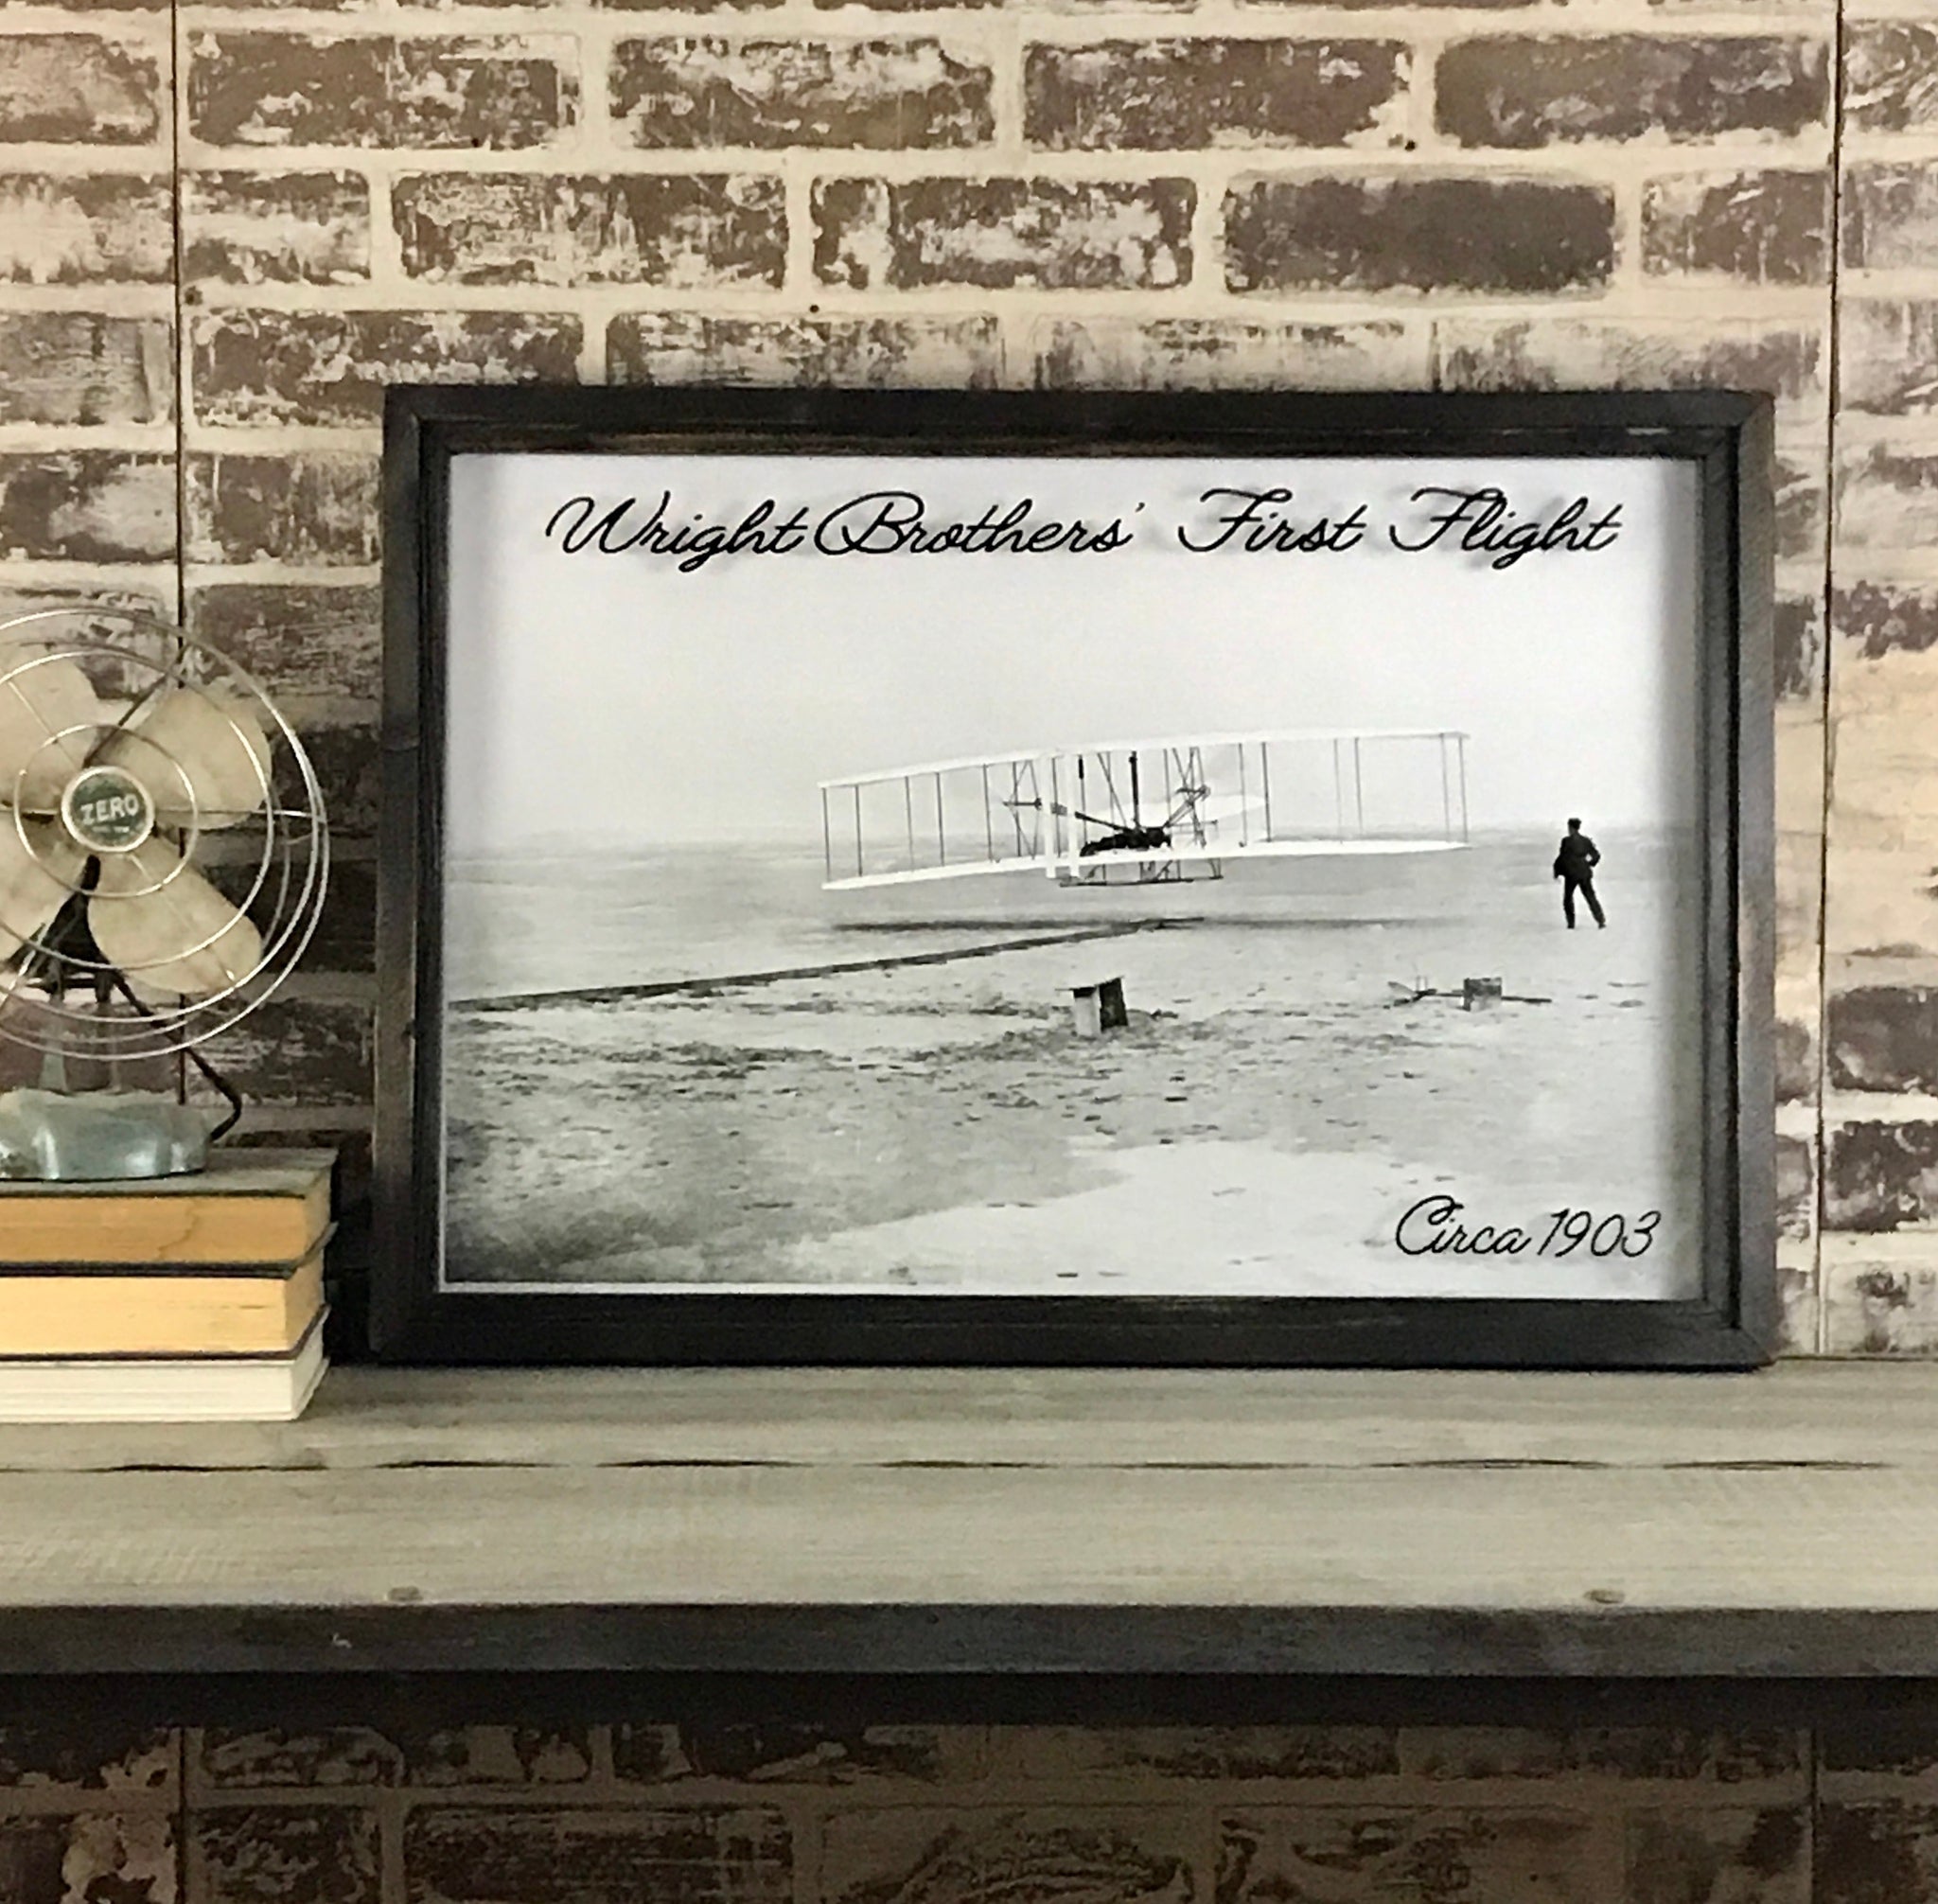 1903 Wright Brothers' First Flight